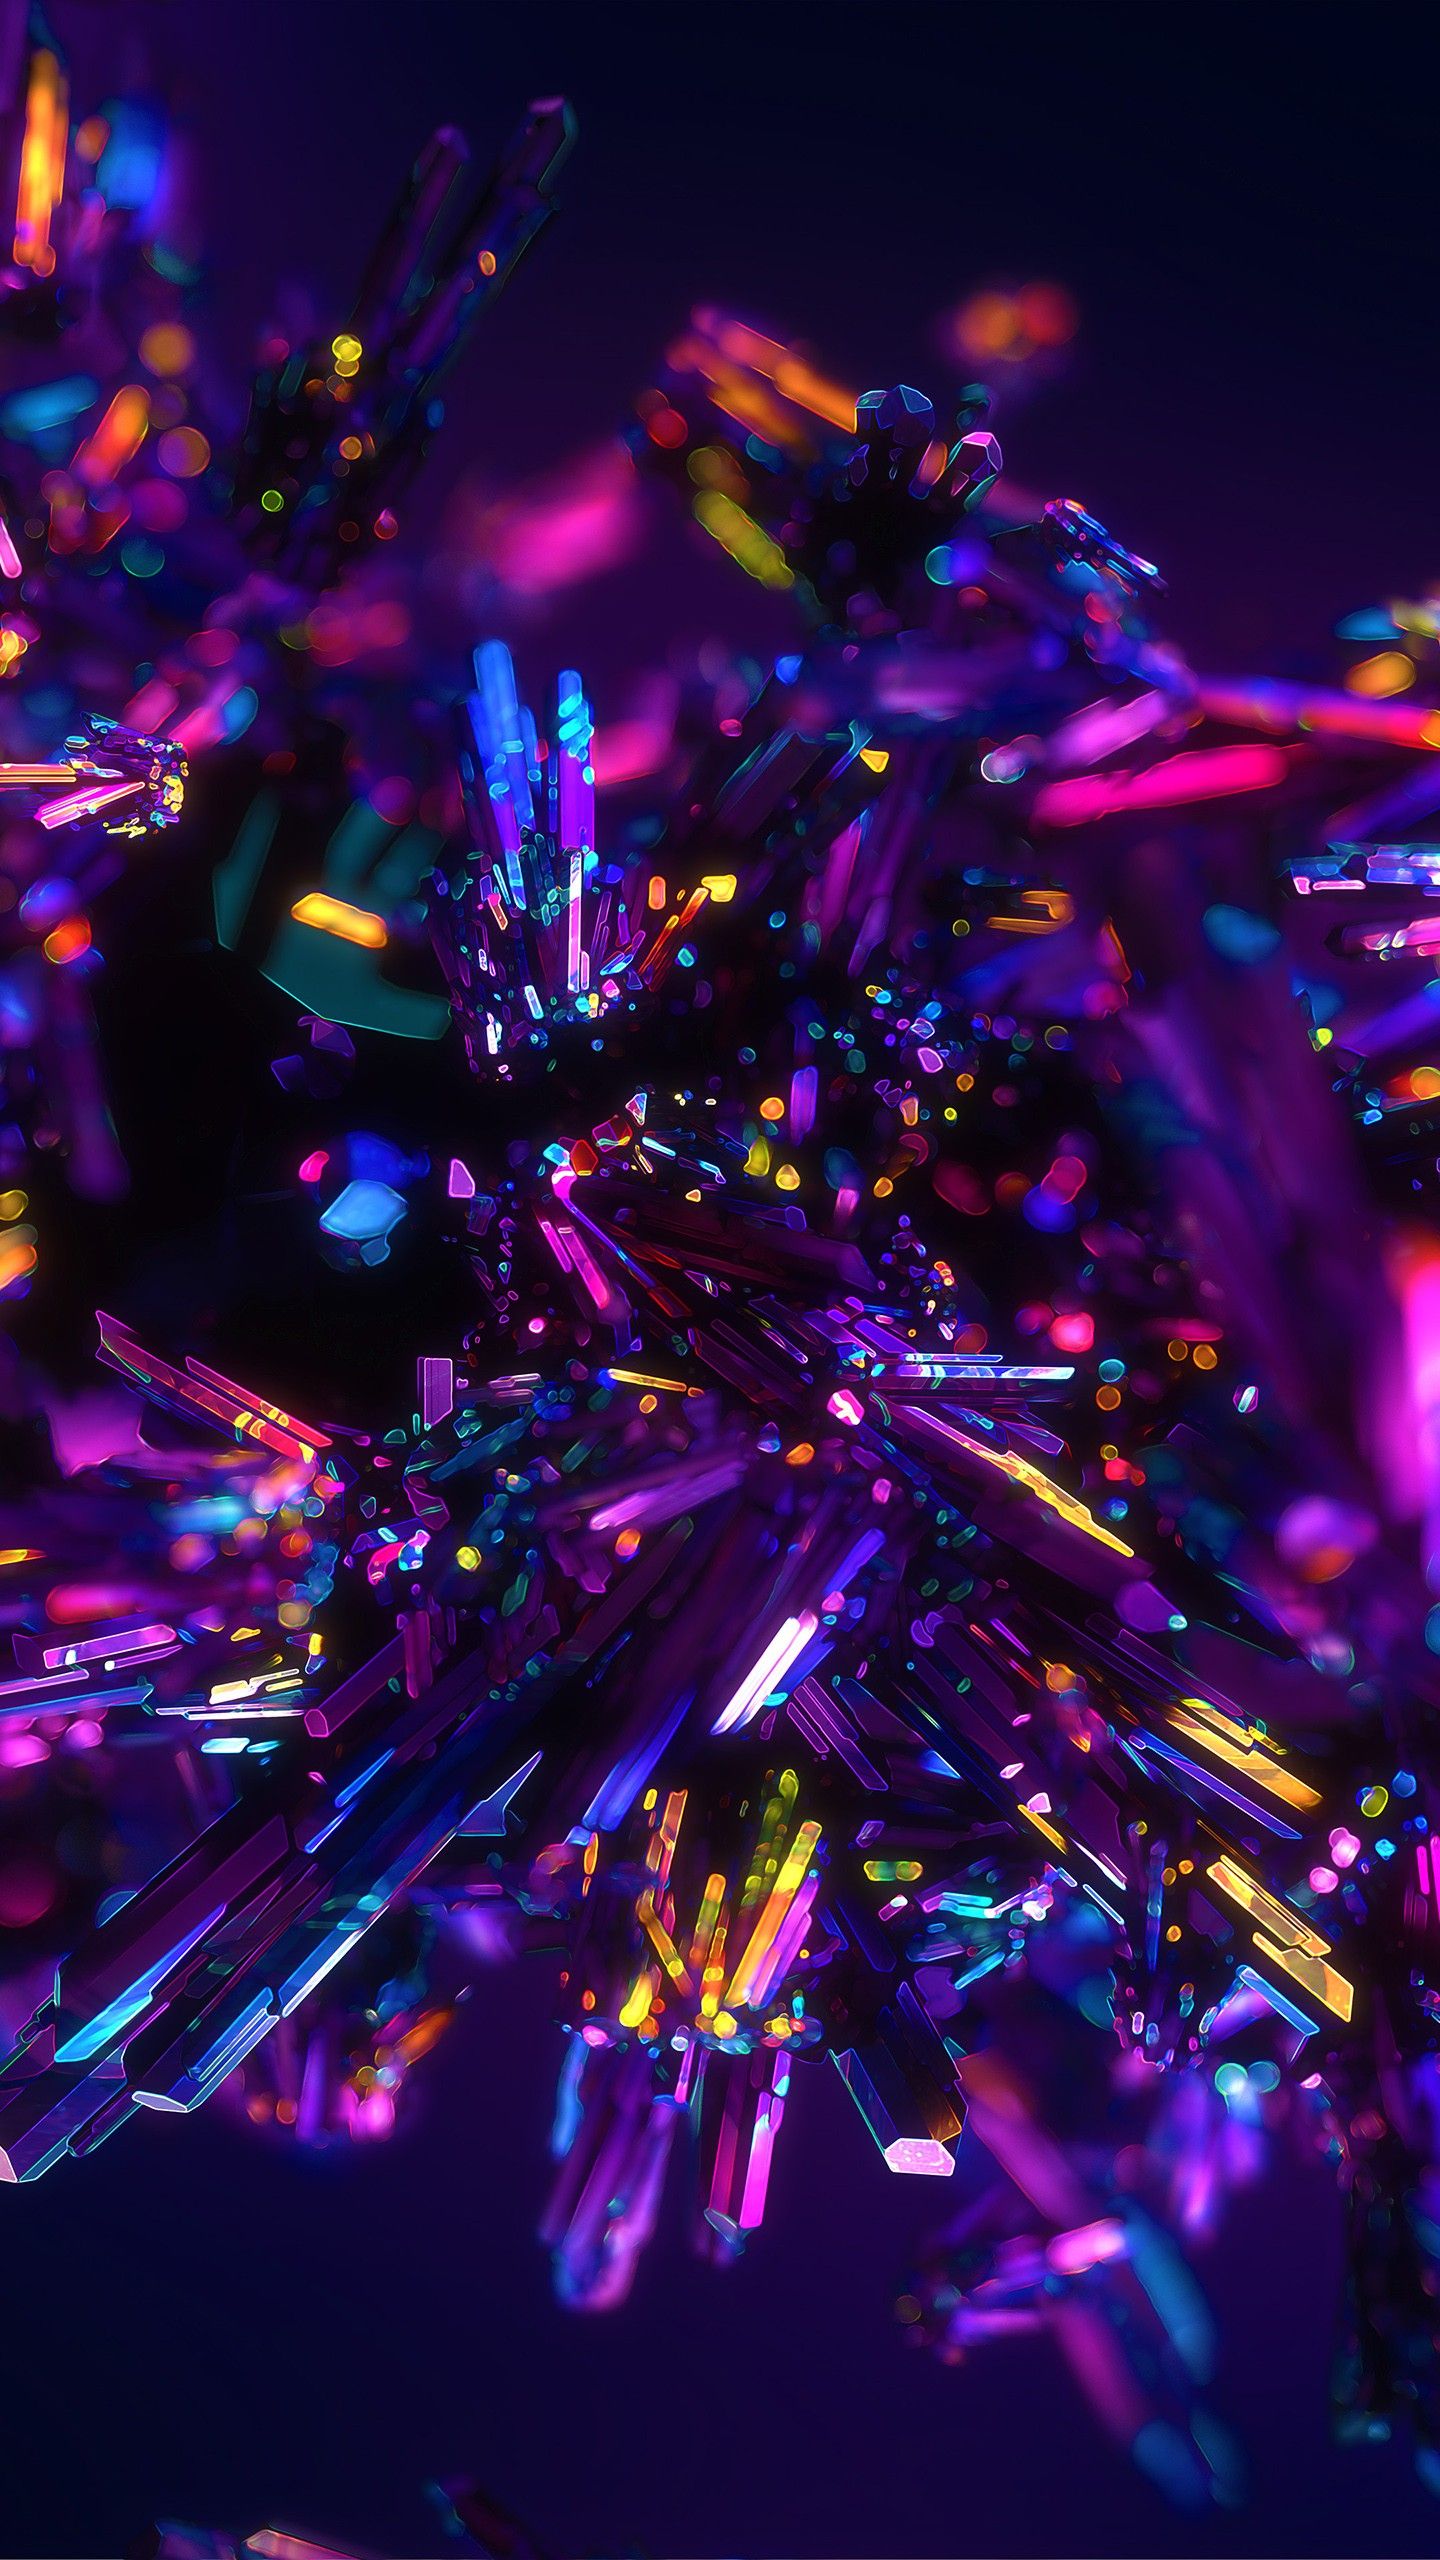 Crystal Phone Wallpaper Free Crystal Phone Background